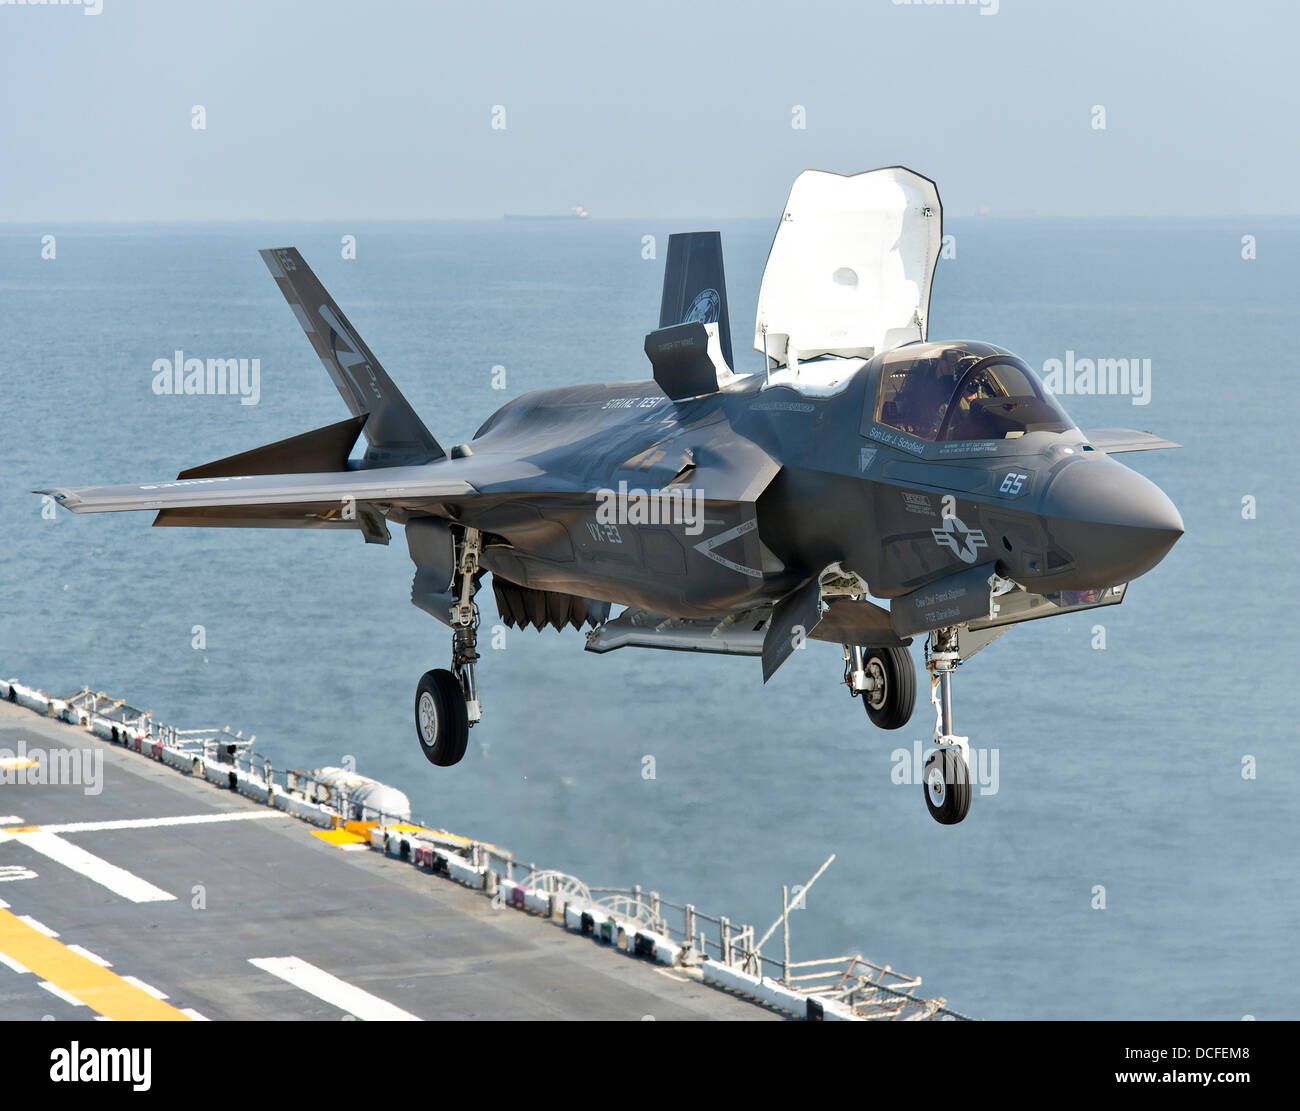 A Marine Corps F-35B Lightning II stealth fighter aircraft takes off from the amphibious assault ship USS Wasp during the second at-sea F-35 developmental test August 14, 2013 in the Atlantic Ocean. The F-35B is the Marine Corps variant of the joint strike fighter is a vertical take off and landing aircraft. Stock Photo